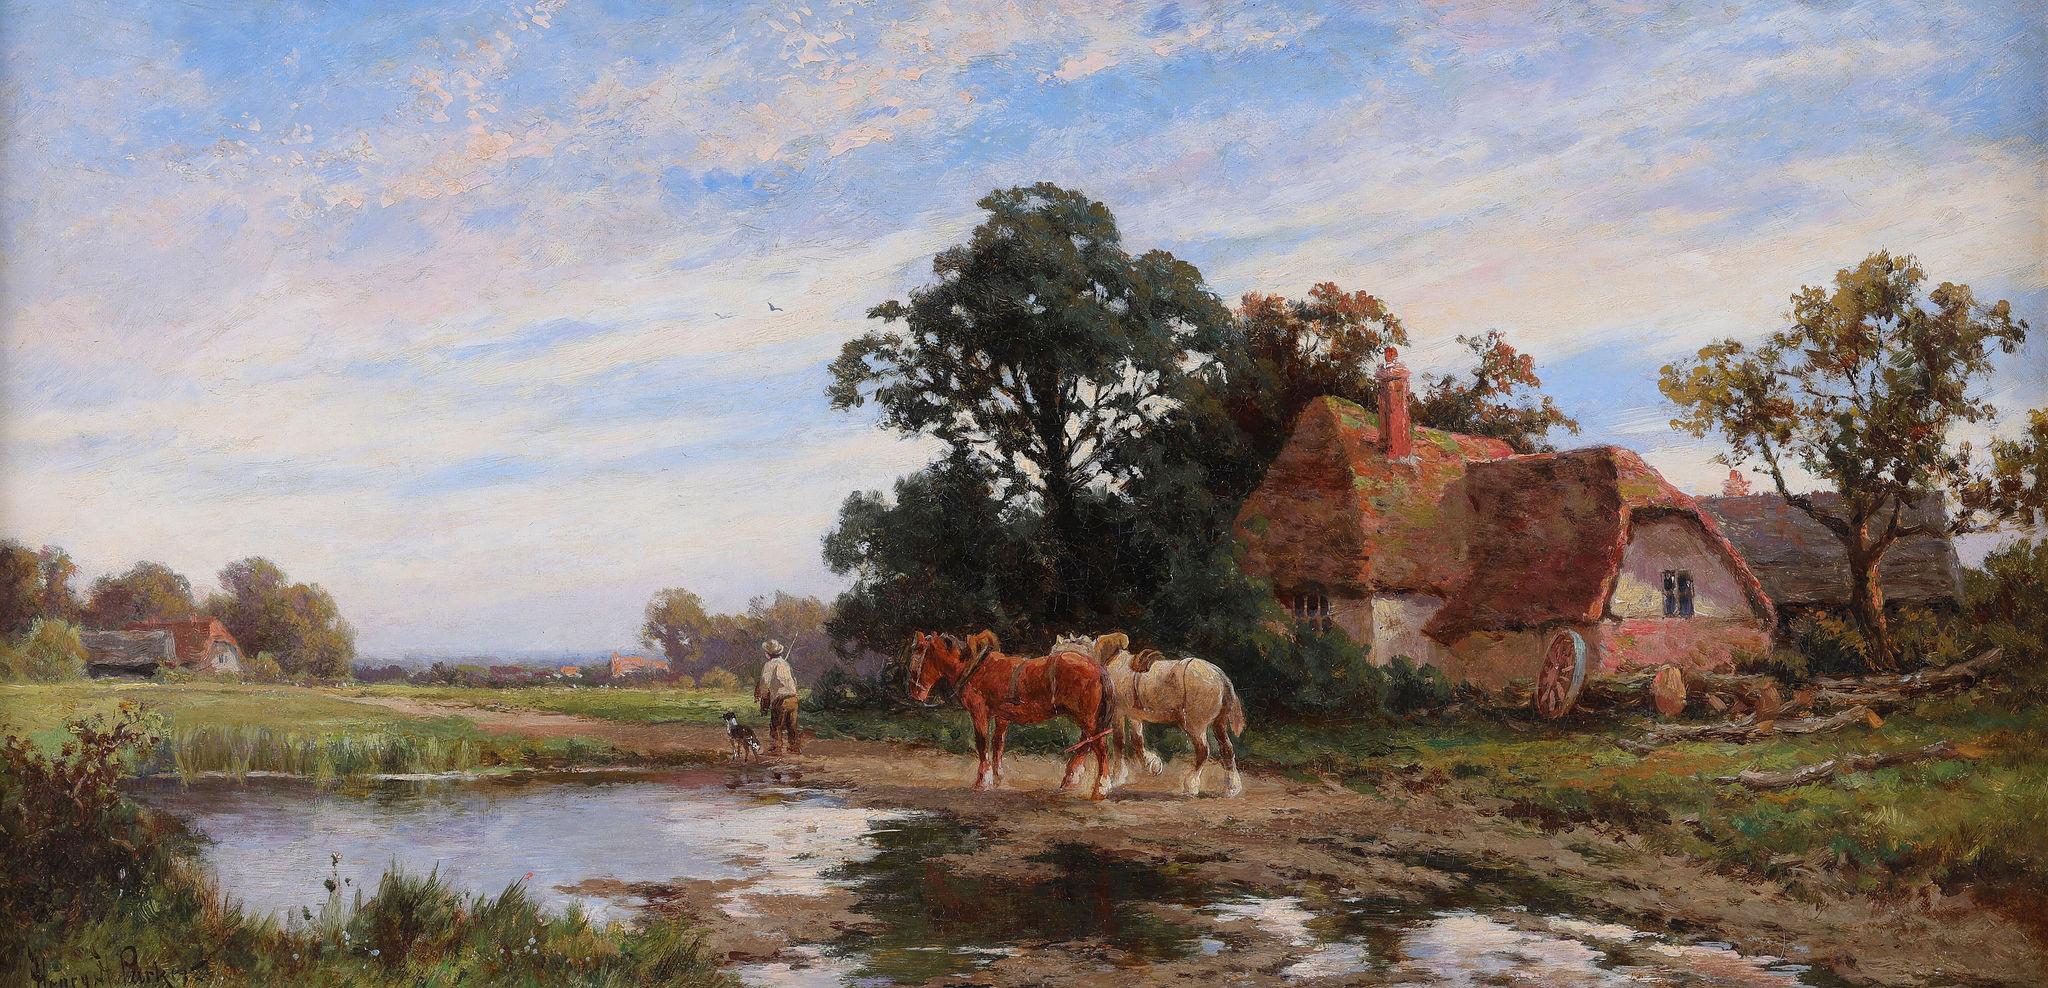 On the Way to Work - Painting by Henry H Parker